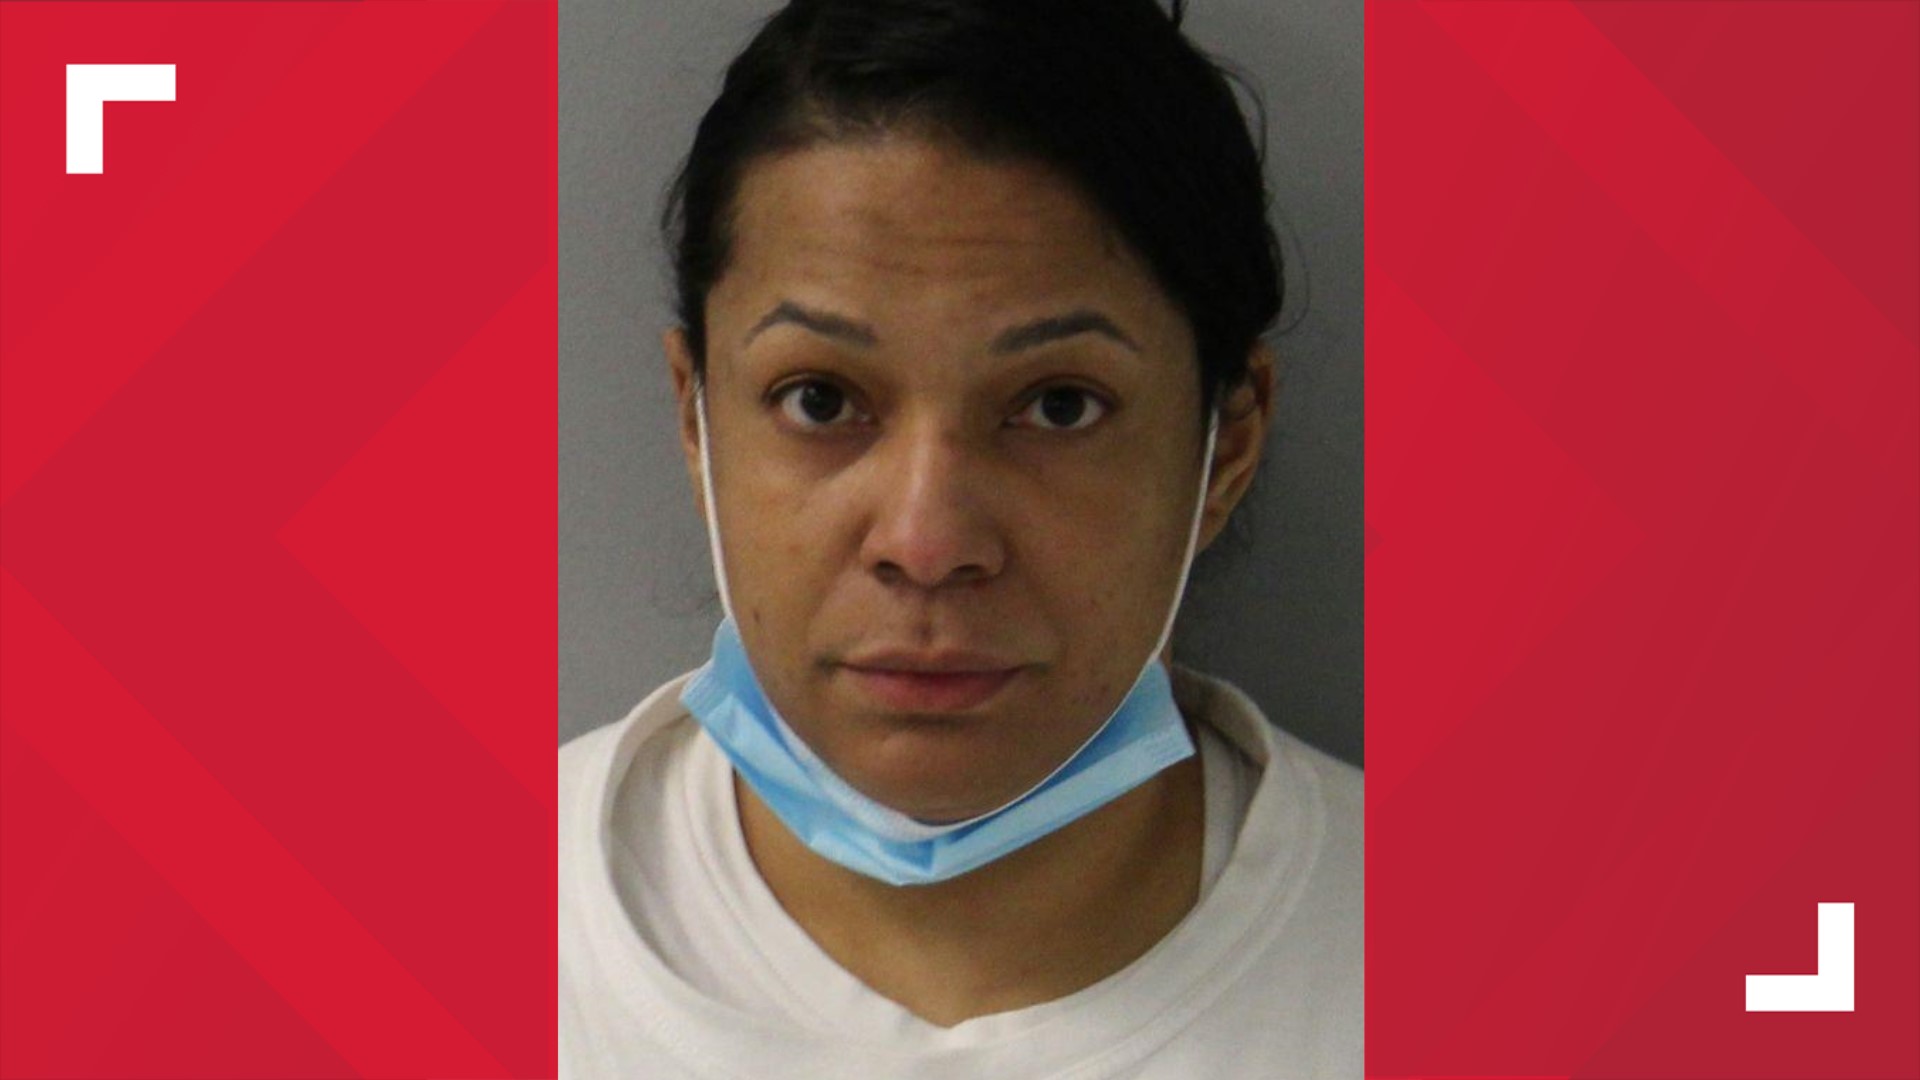 Authorities said Denia Avila recruited seven co-conspirators to help plan and carry out the kidnapping of the couple near their Hilliard home in November 2019.